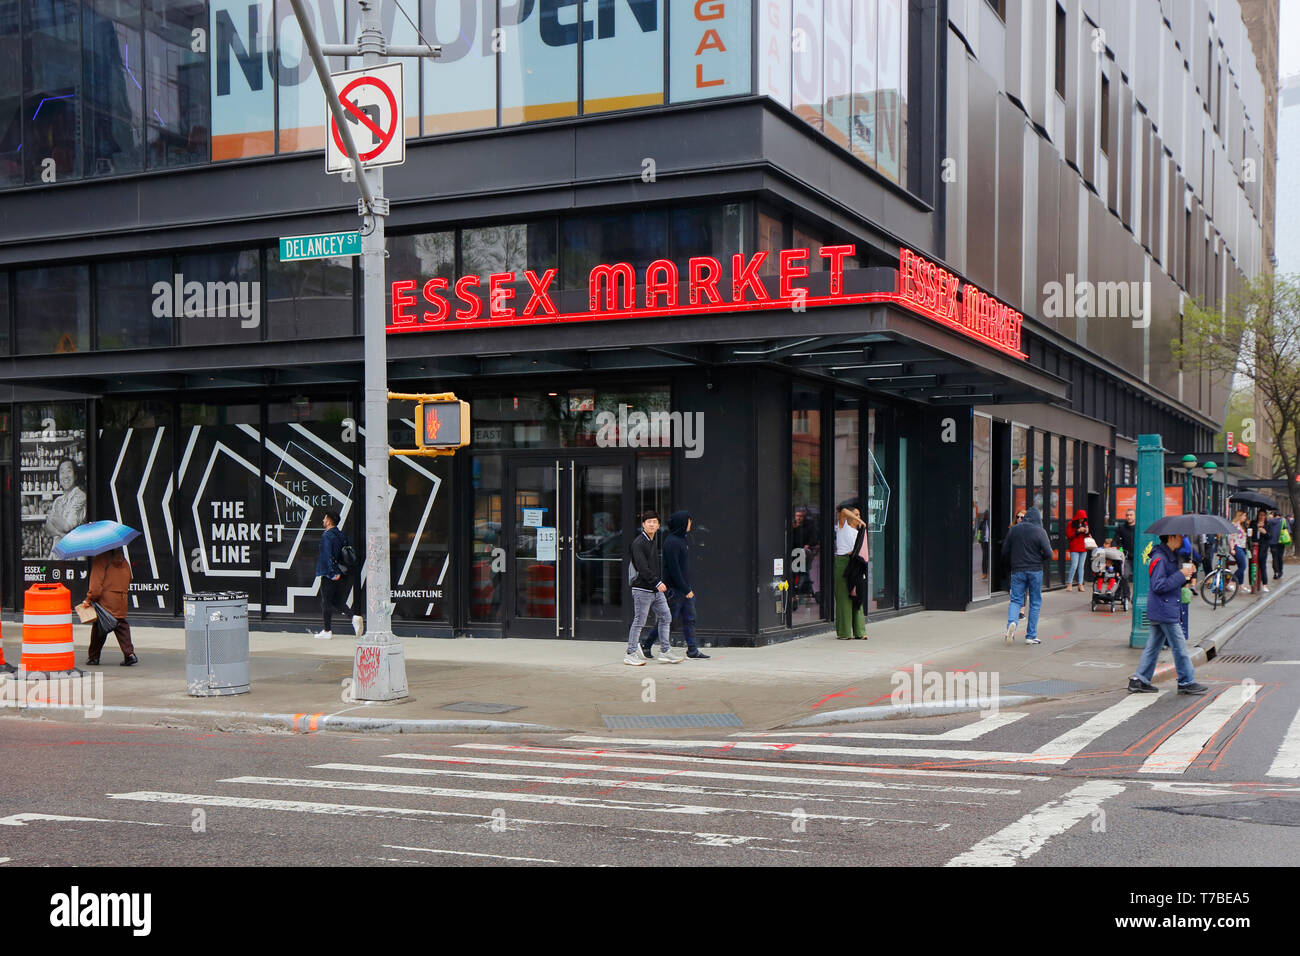 Essex Market, May 2019. Lower East Side, New York City Stock Photo